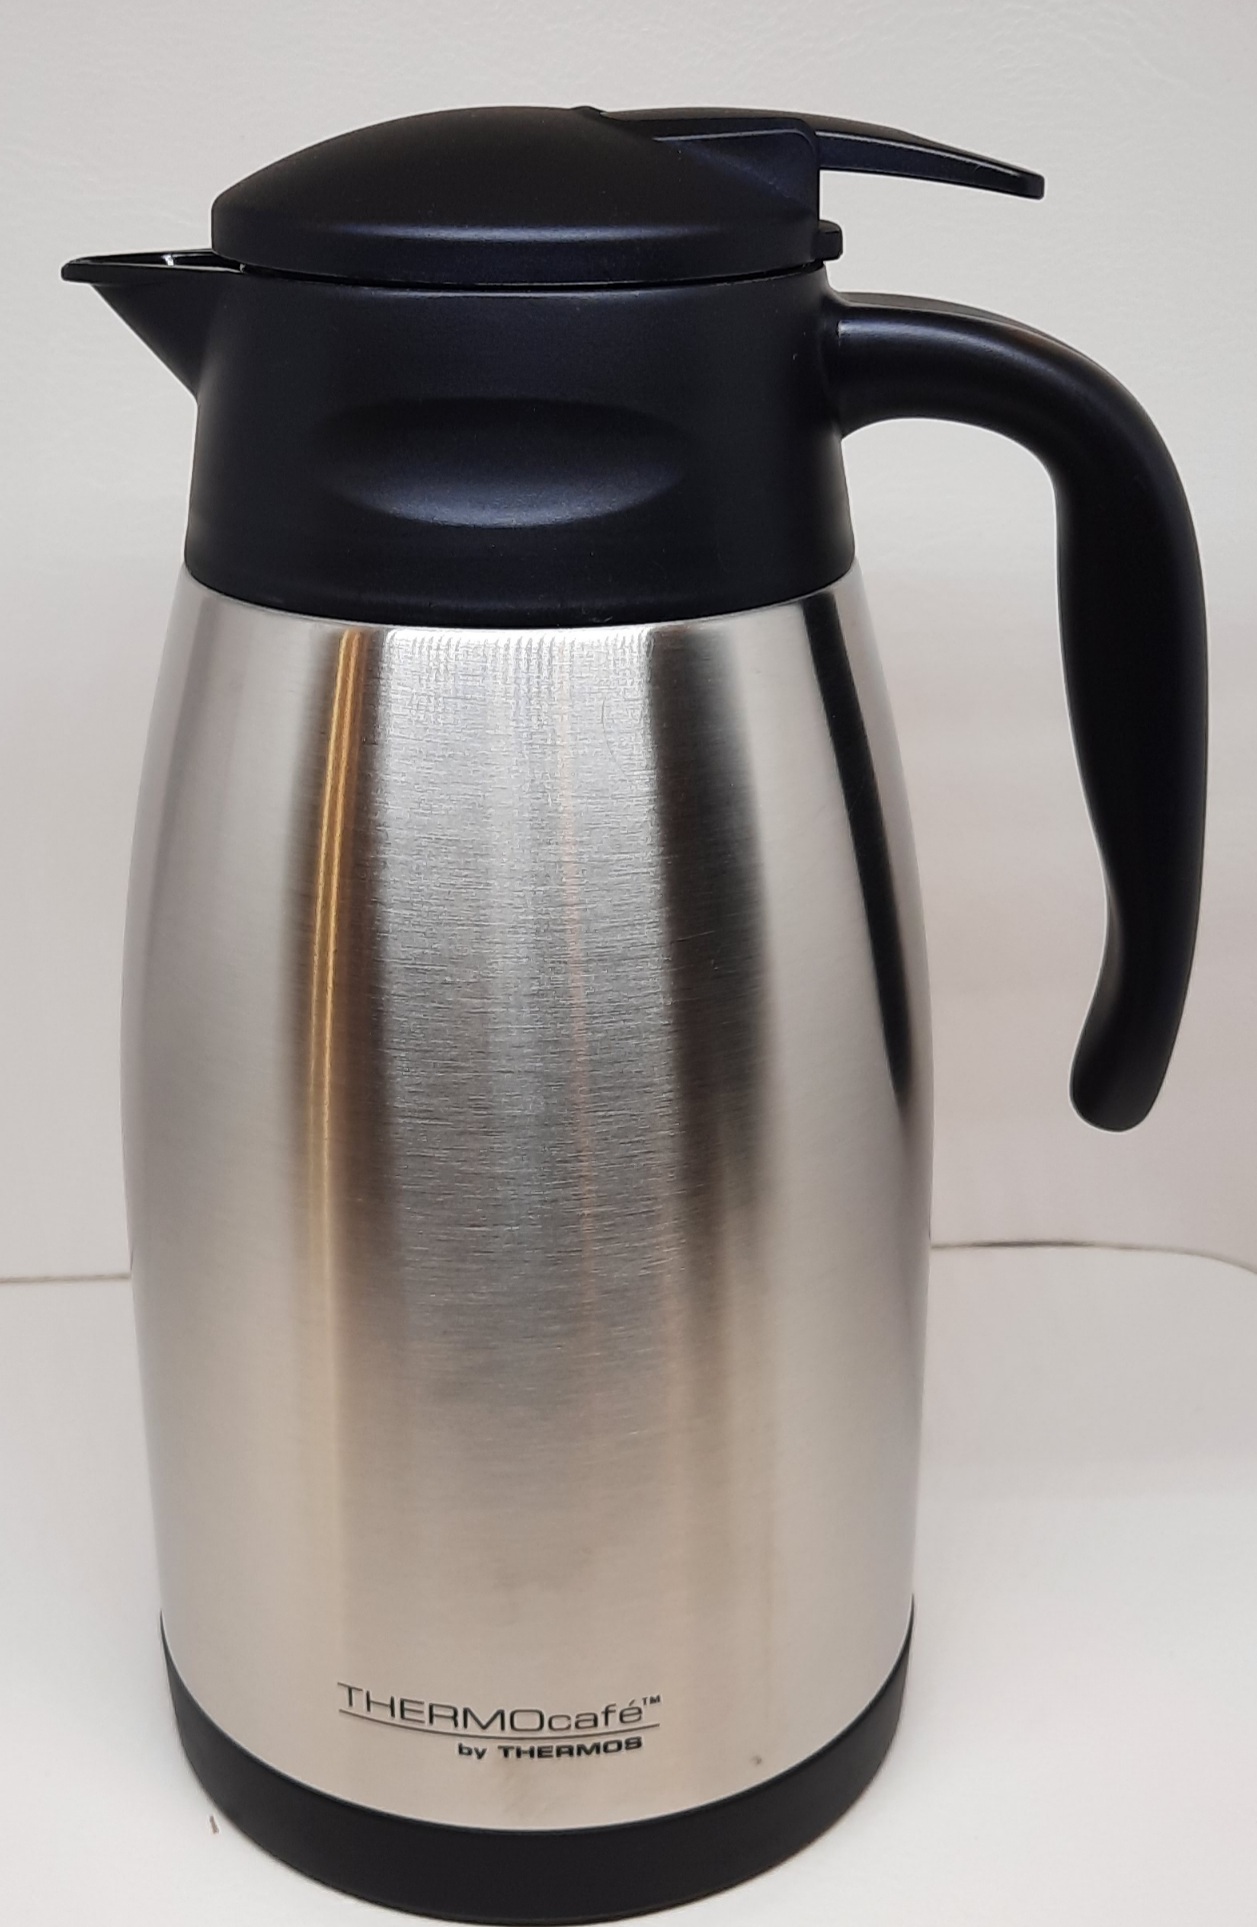 Thermos Isolierkanne Thermo Cafe Edelstahl 1,5 L doppelwandig,Thermos 